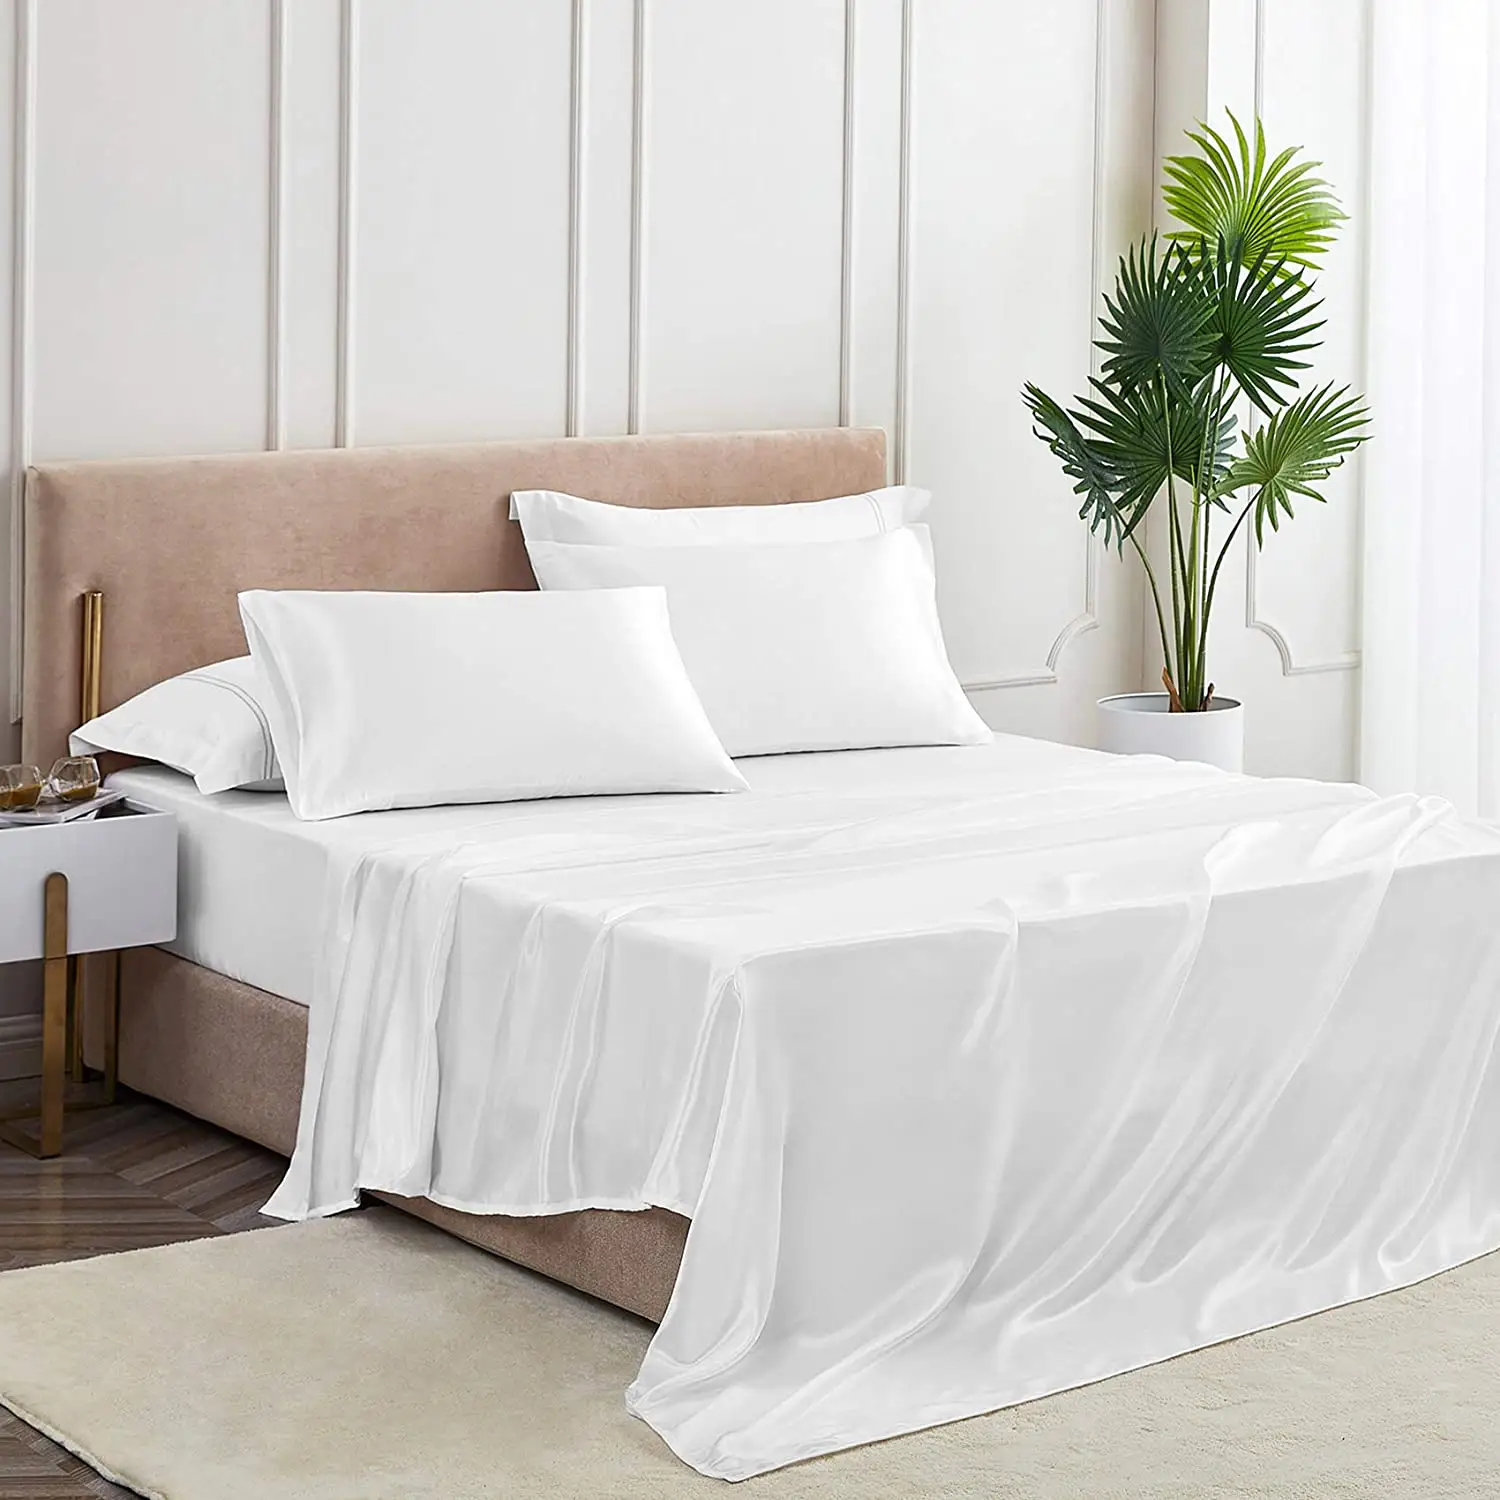 White Queen US Size Mulberry Silk Sheets Bedding Set Satin Pillowcase for Hair and Skin Bed Pillow Cases